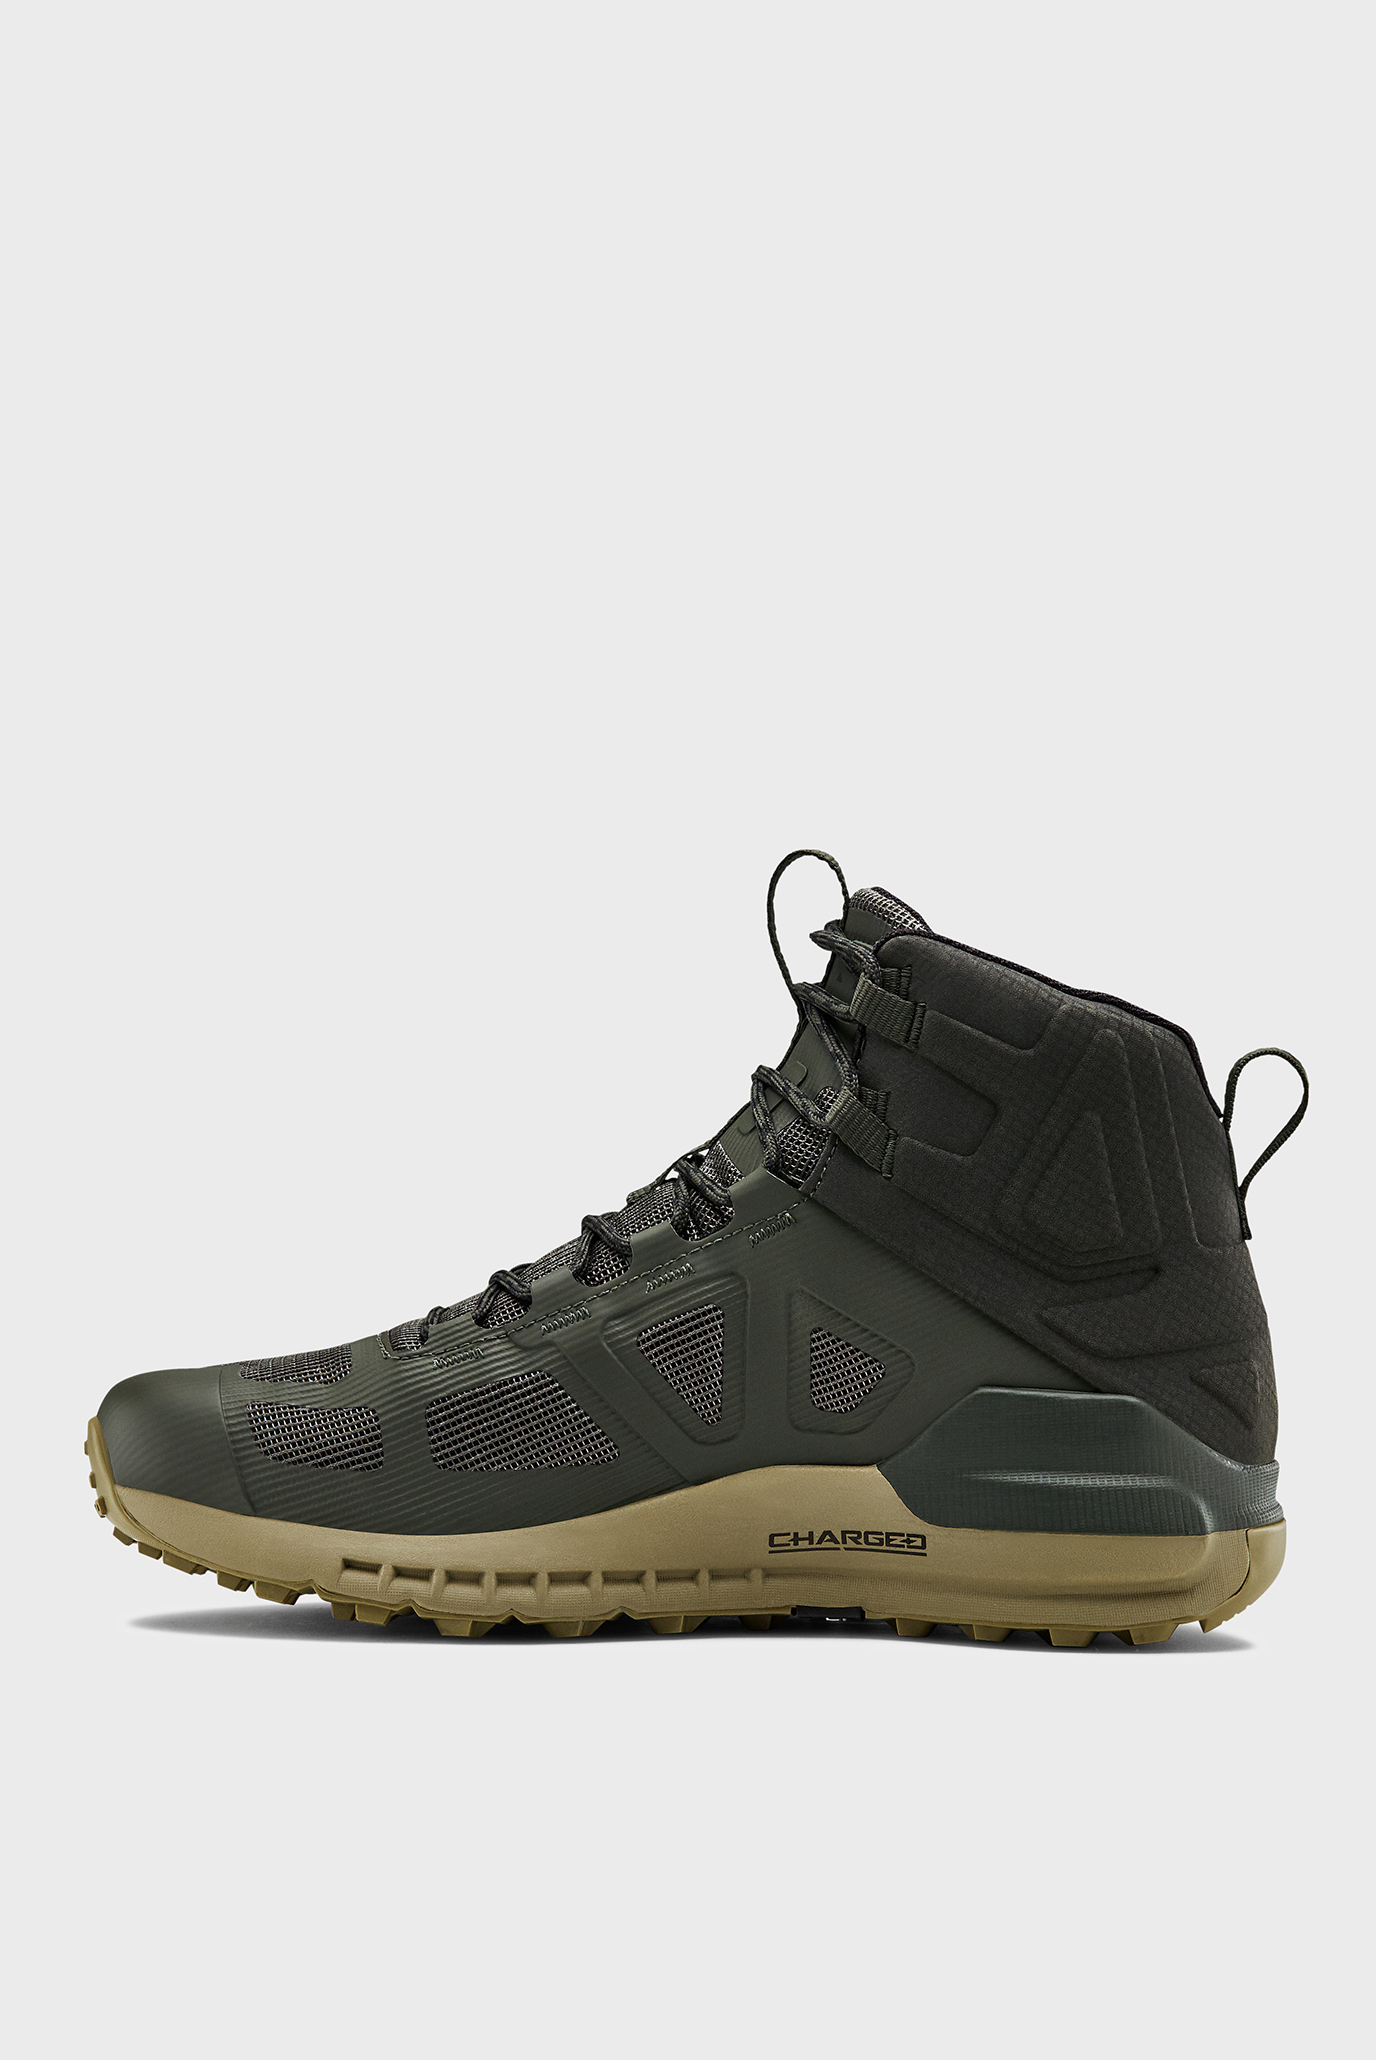 under armour verge 2. mid gtx hiking boot